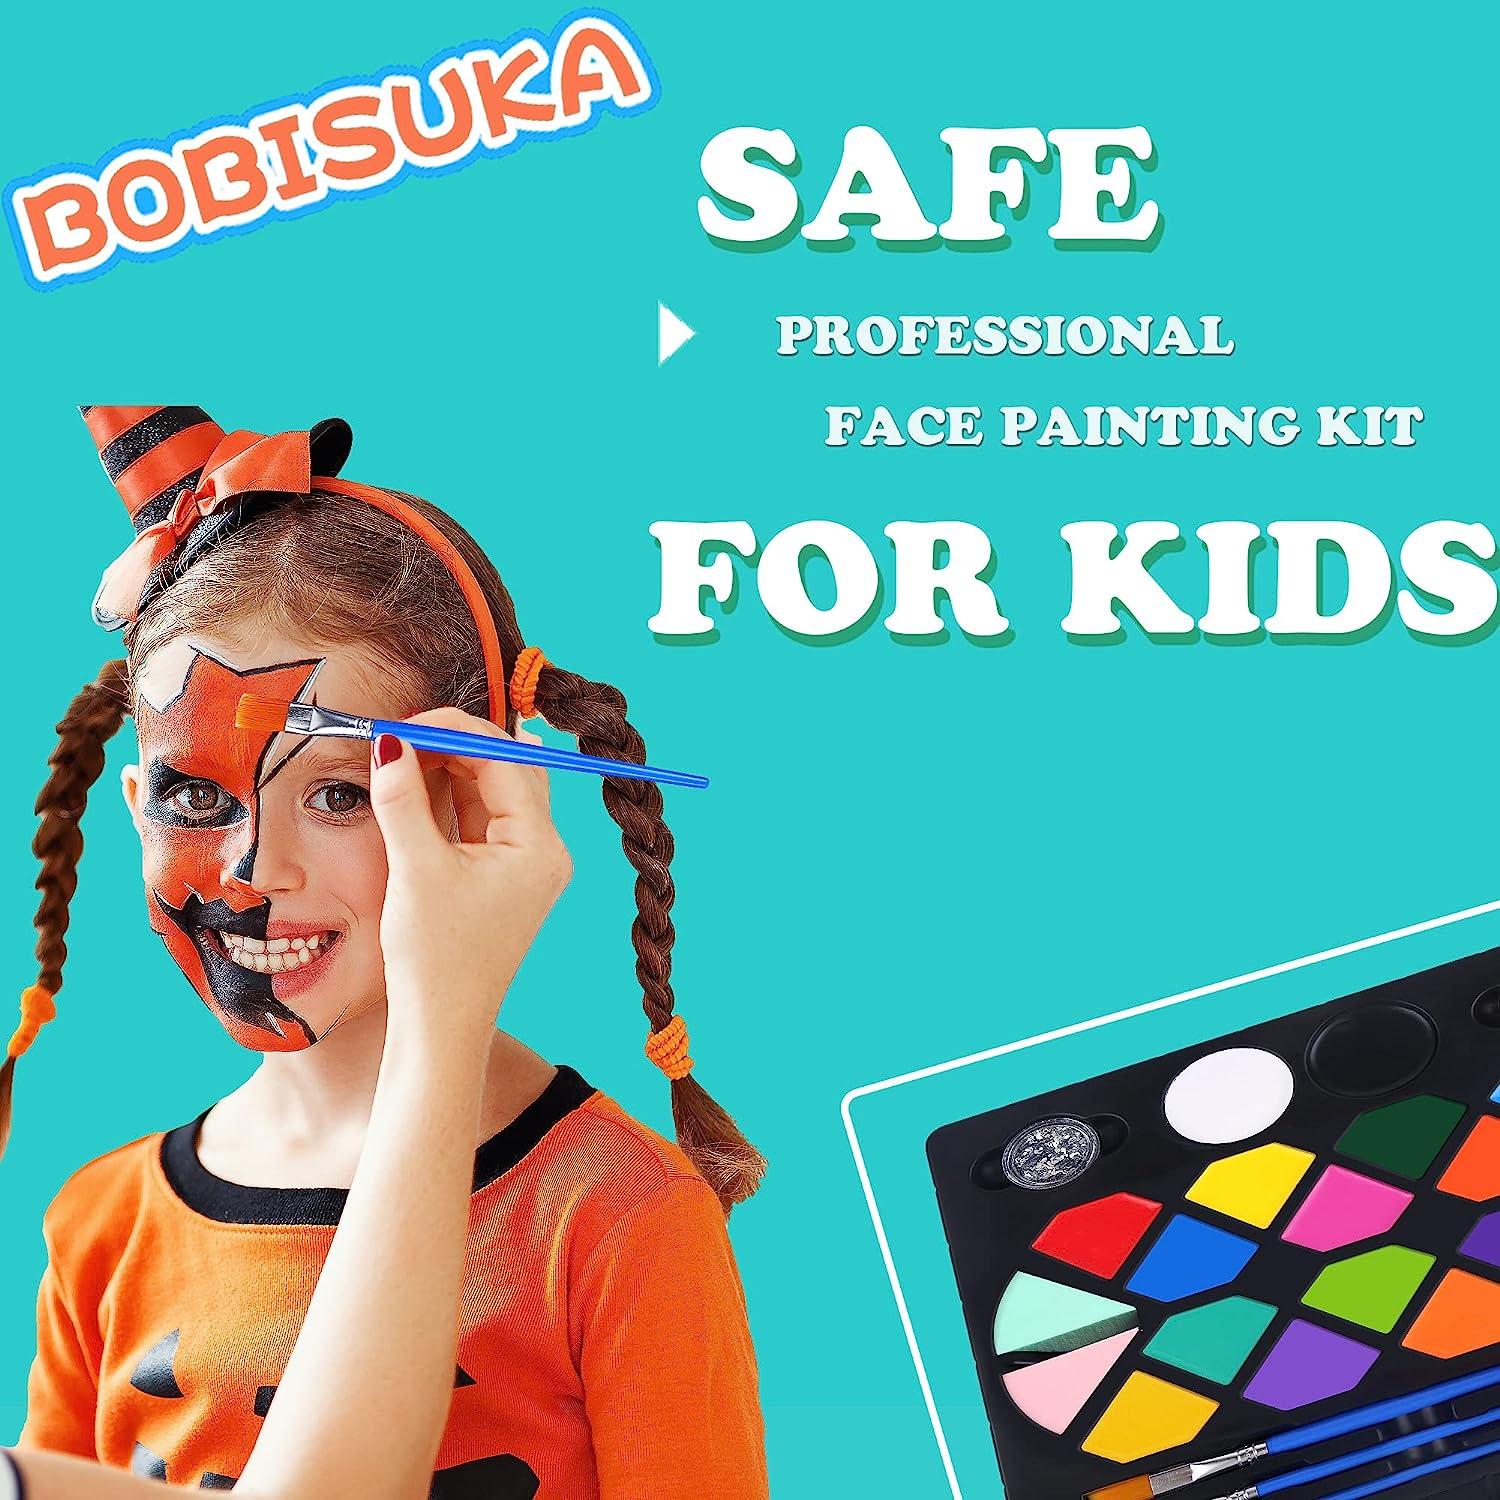 BOBISUKA Face Painting Kit for Kids - 16 Colors Water Based Body